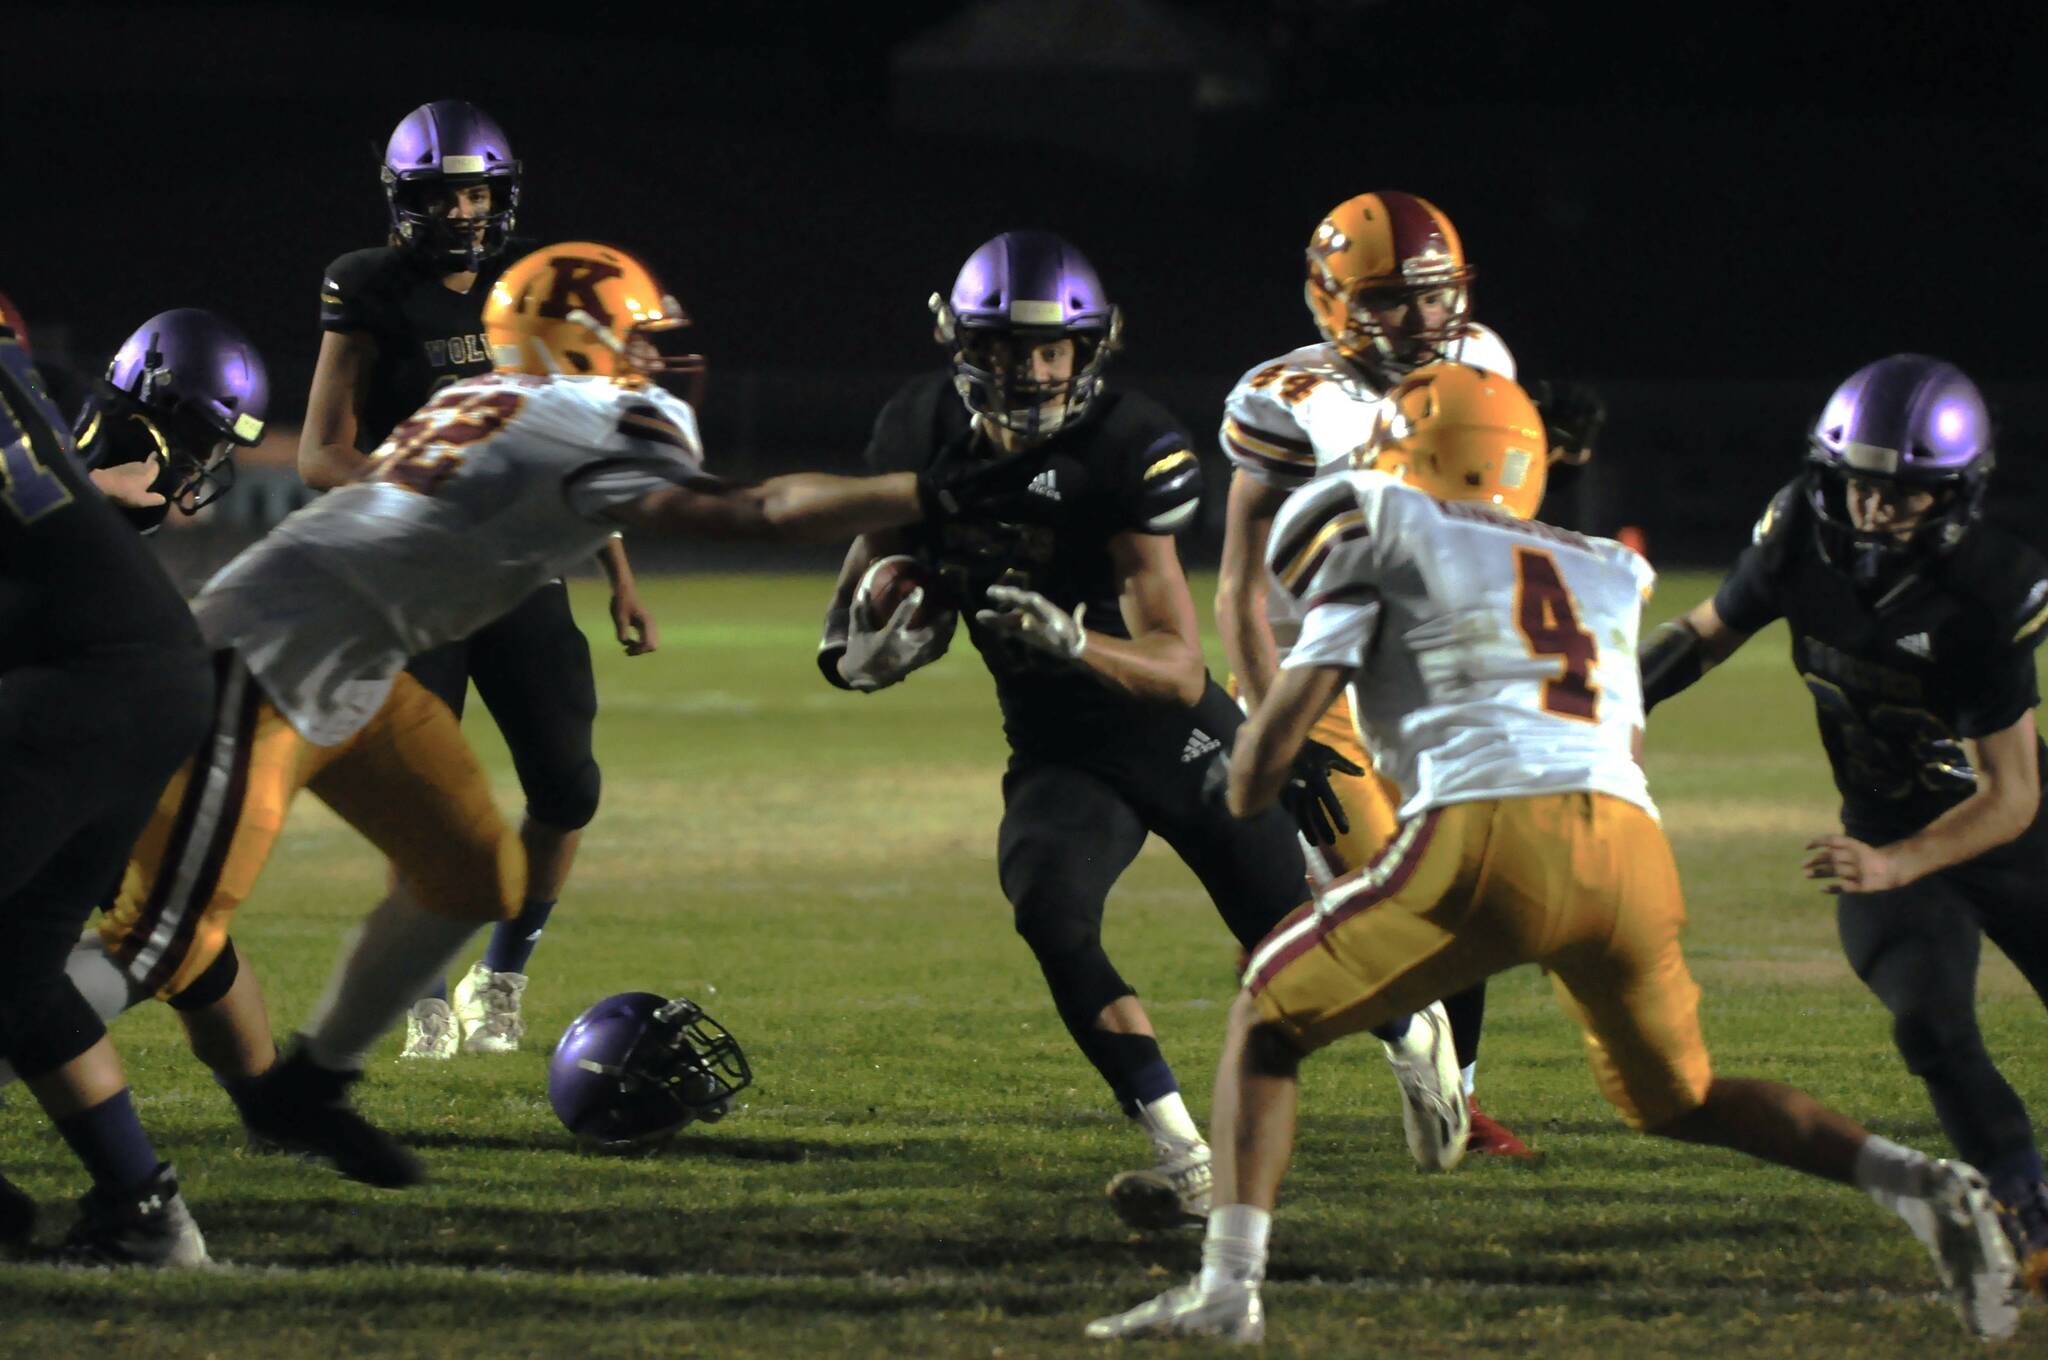 Sequim Gazette photo by Michael Dashiell / Sequim’s Aiden Gockerell, center, drives into the end zone for a first quarter touchdown in the Wolves’ 27-13 Homecoming win over Kingston on Sept. 30.